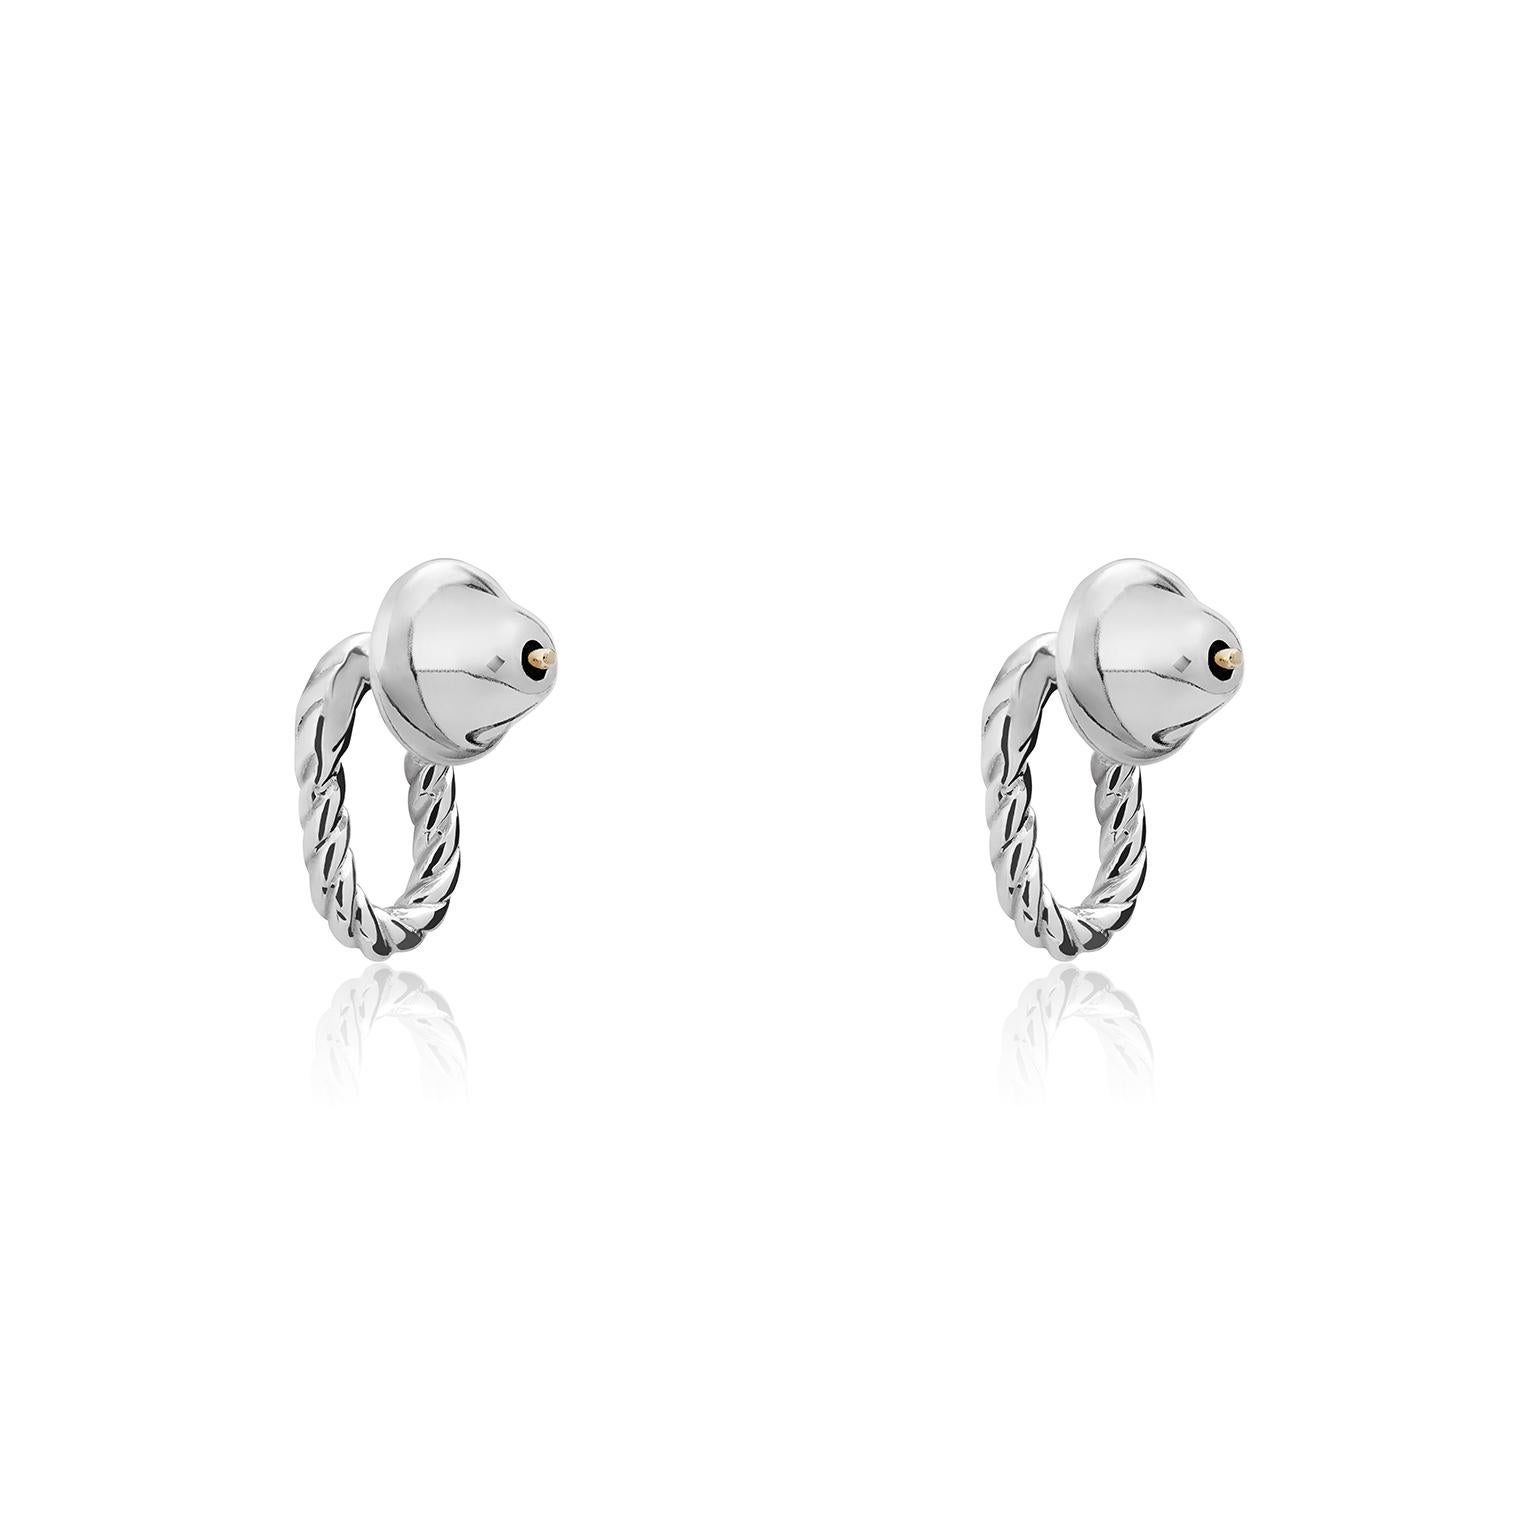 The Ana earrings are inspired on one of TANE's trademark chains, which has been part of the brand for many years, albeit quietly as part of the iconic Biora handbag. Today, it makes a comeback in a classical jewelry collection with great